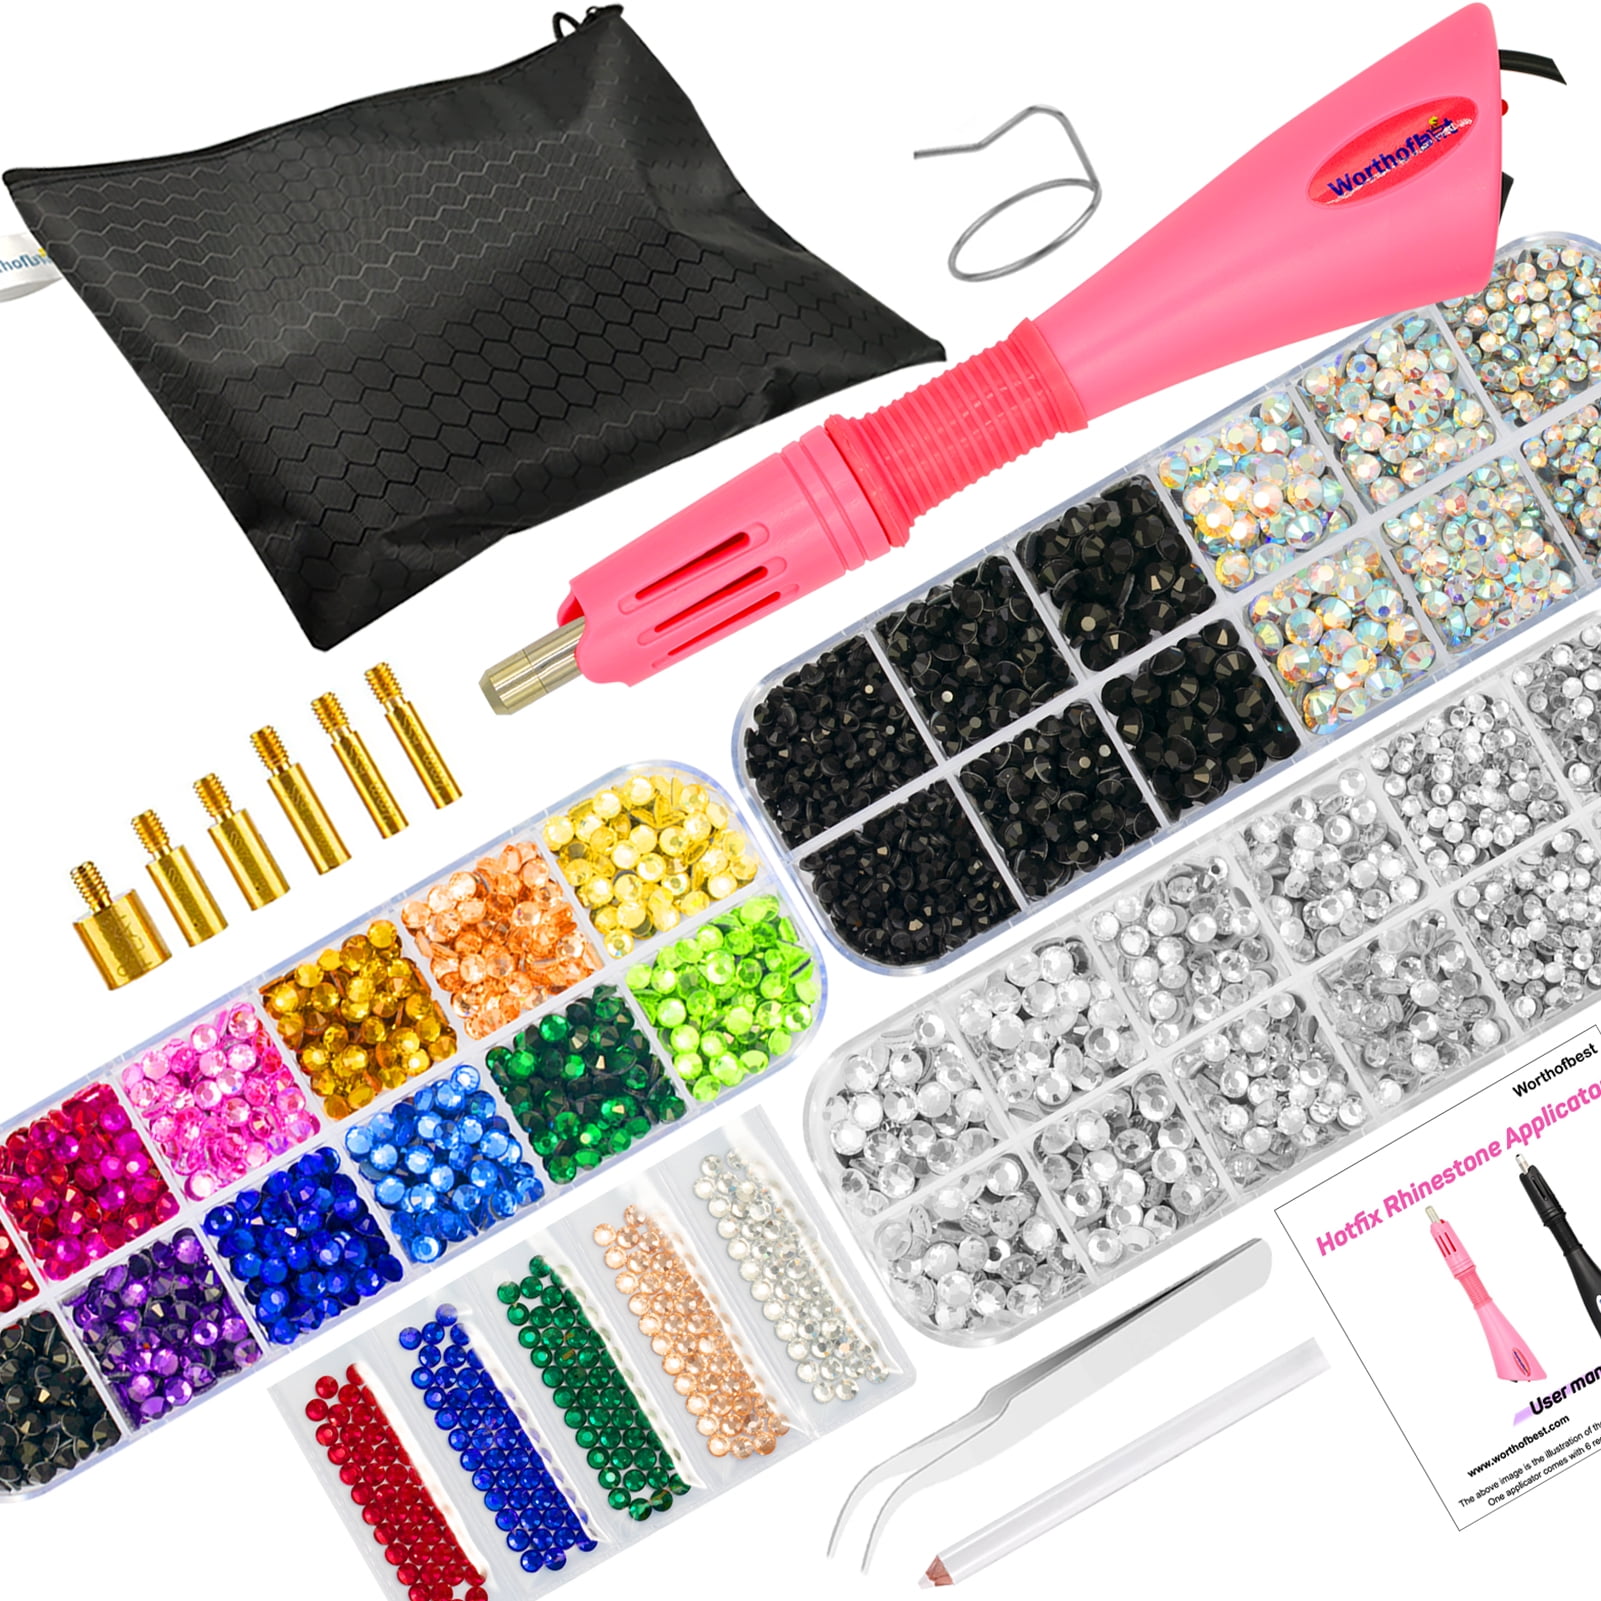 worthofbest Rhinestones for Crafts with Glue Clear, Bedazzler kit